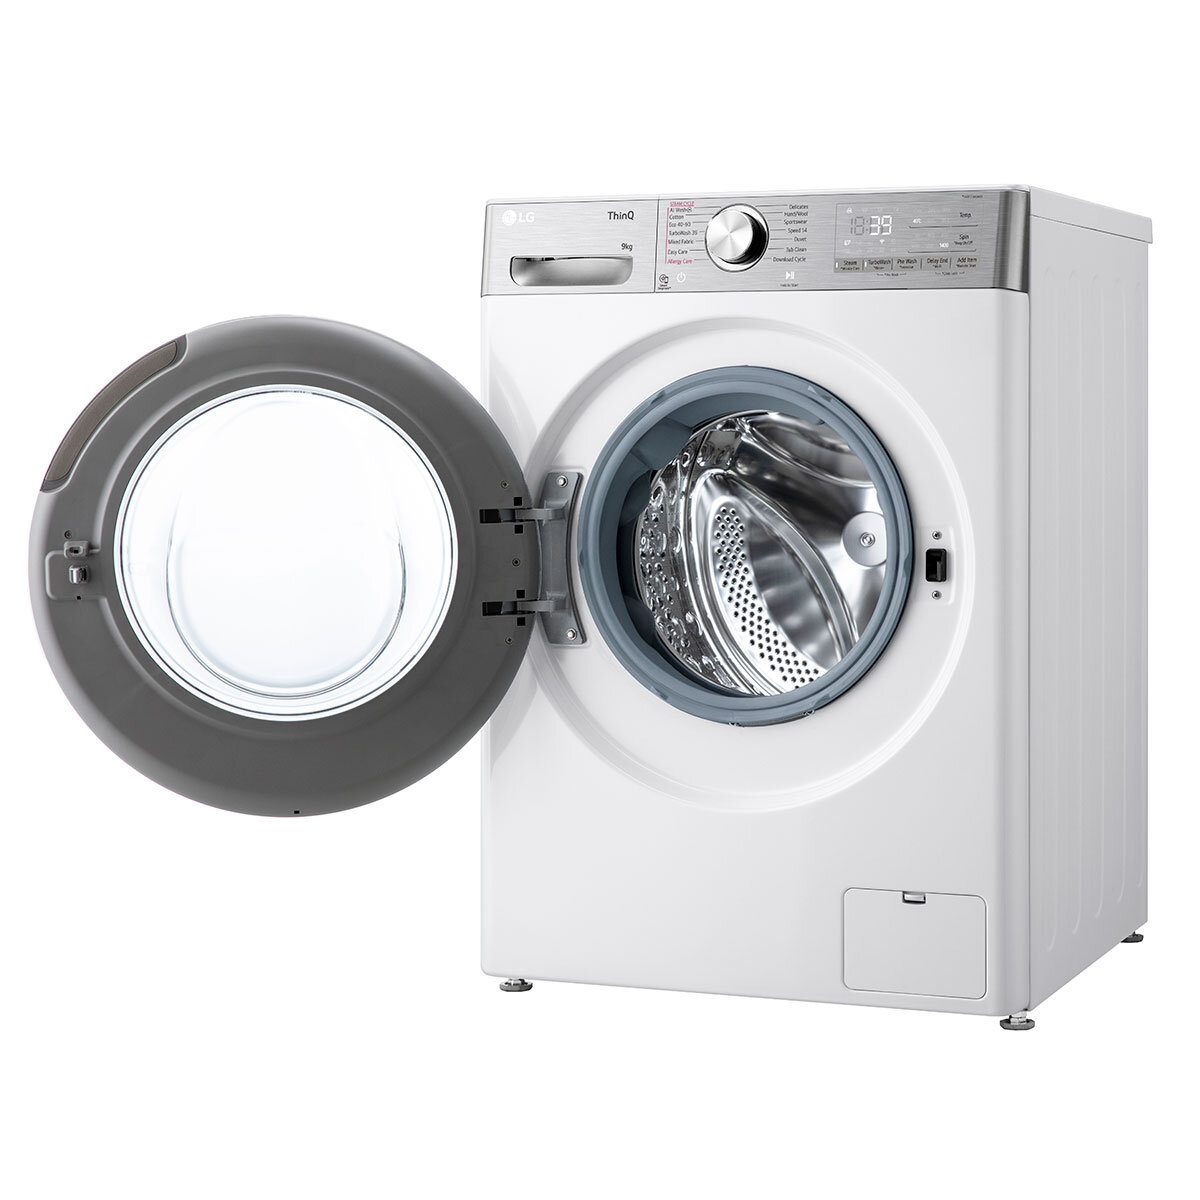 Open LG F4Y909WCTN4 9kg, 1400rpm Washing Machine, A rated in White